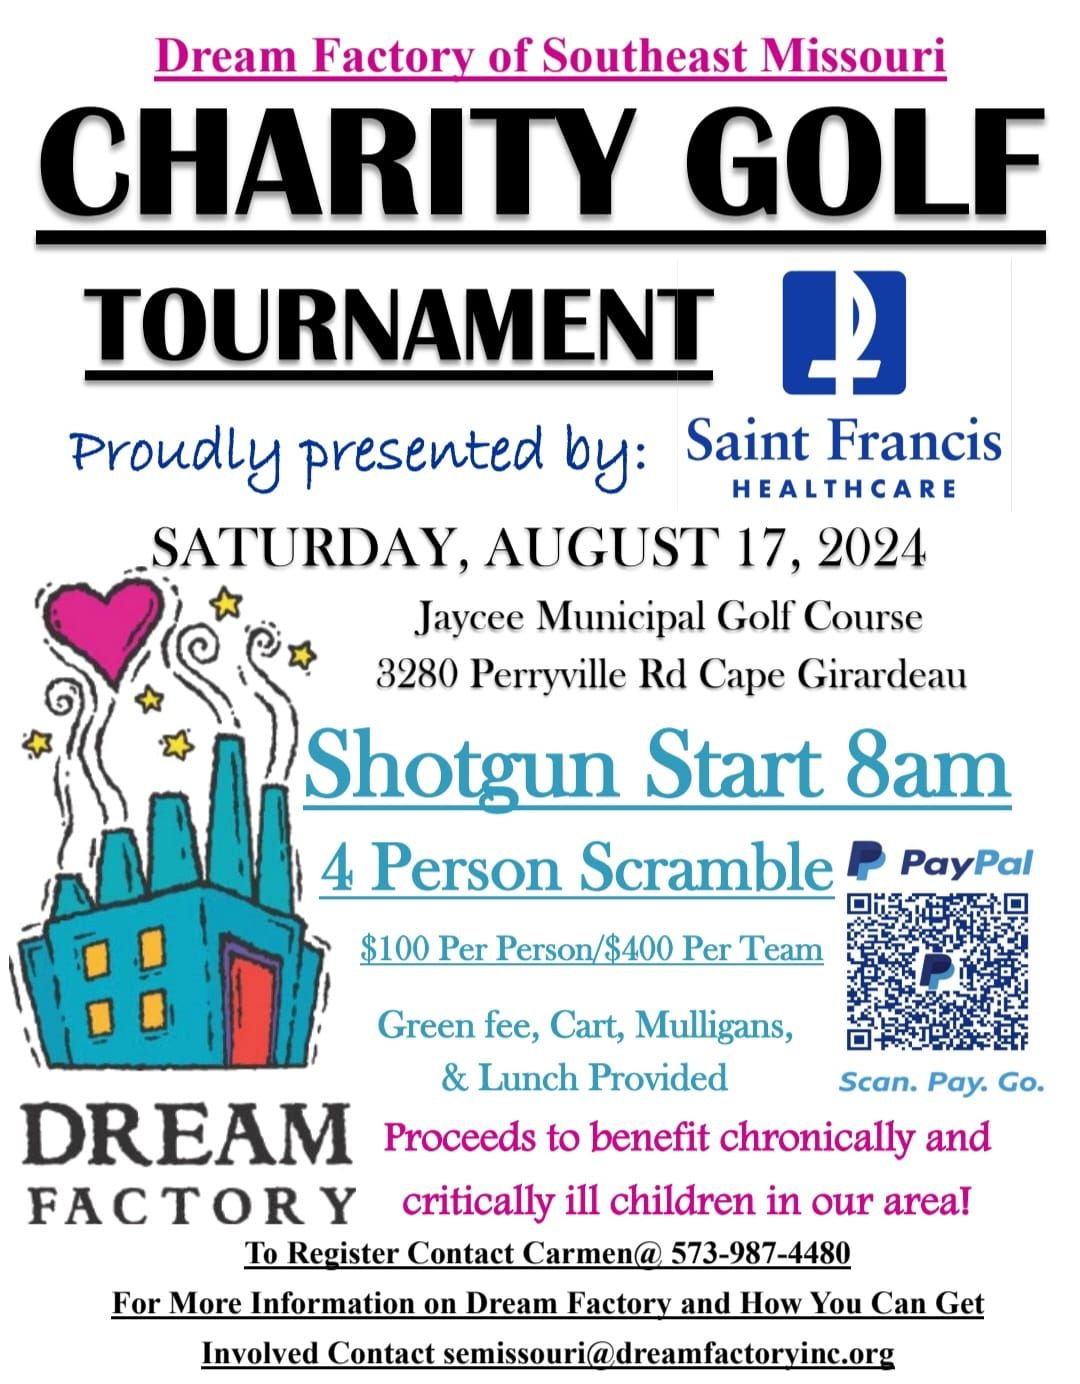 Dream Factory of SEMO 8th Annual Golf Tournament sponsored by Saint Francis Healthcare System